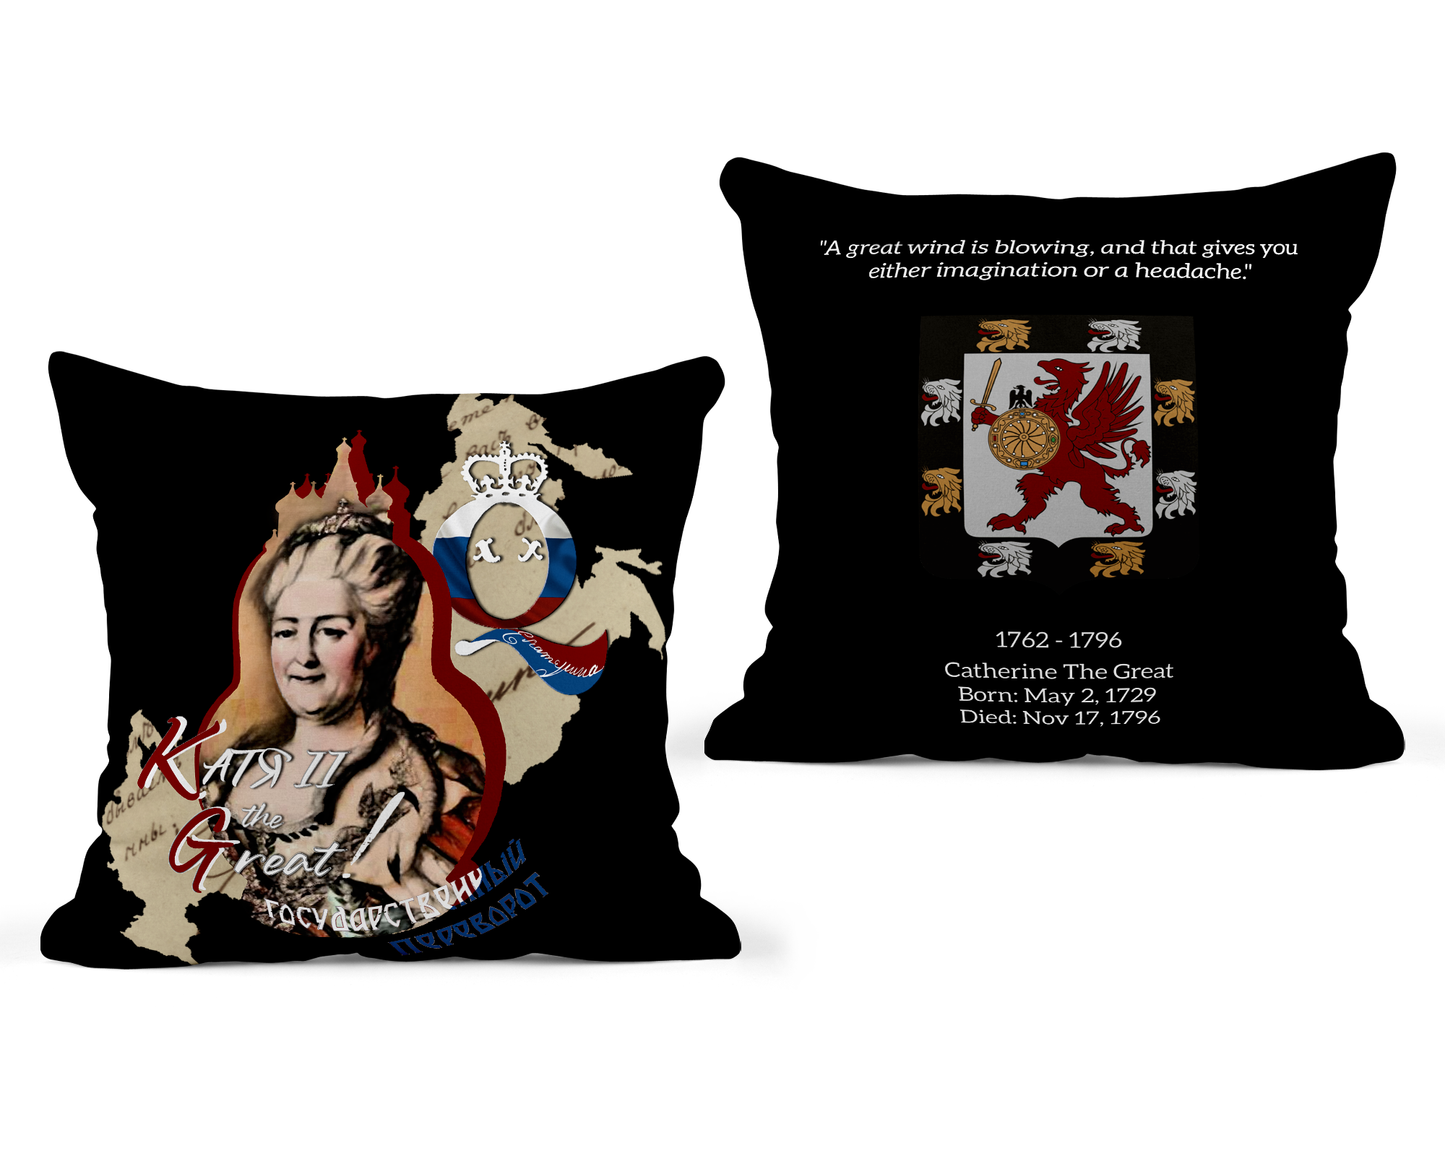 Catherine The Great Pillow Cover- Black - 18x18